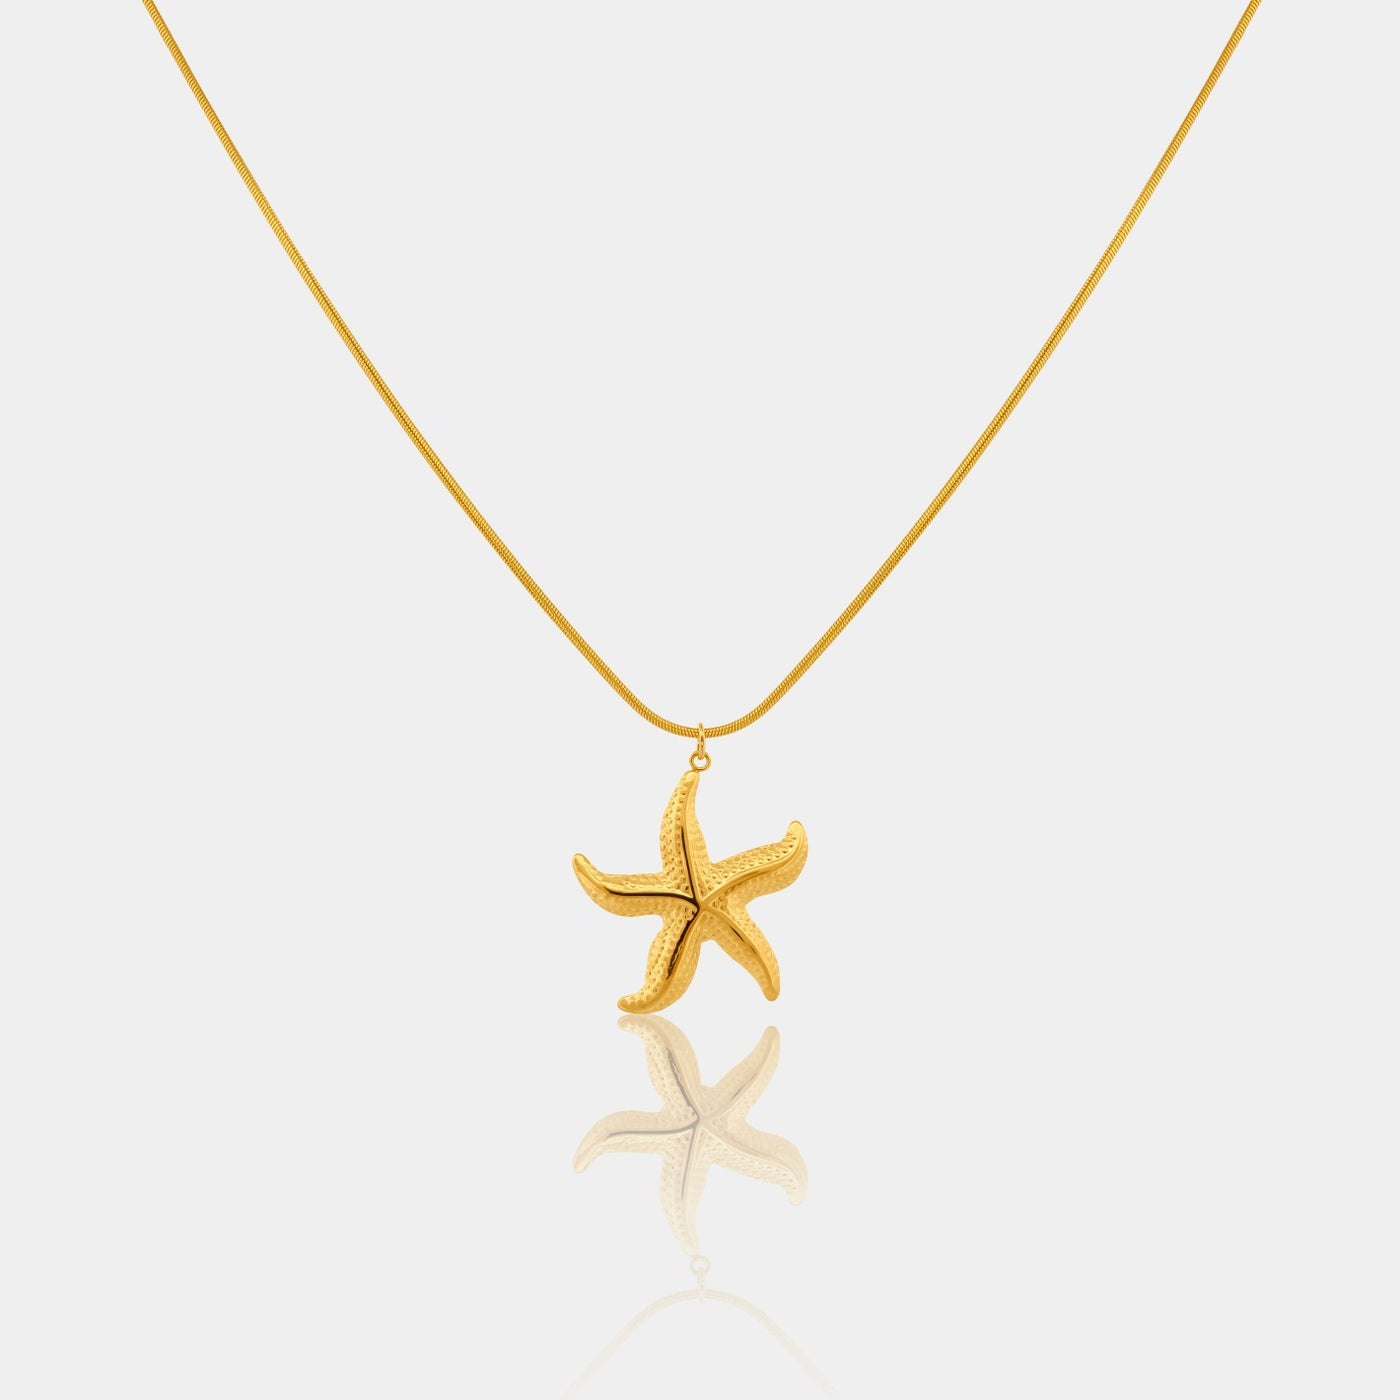 Starfish pendant necklace on 14k gold filled snake chain